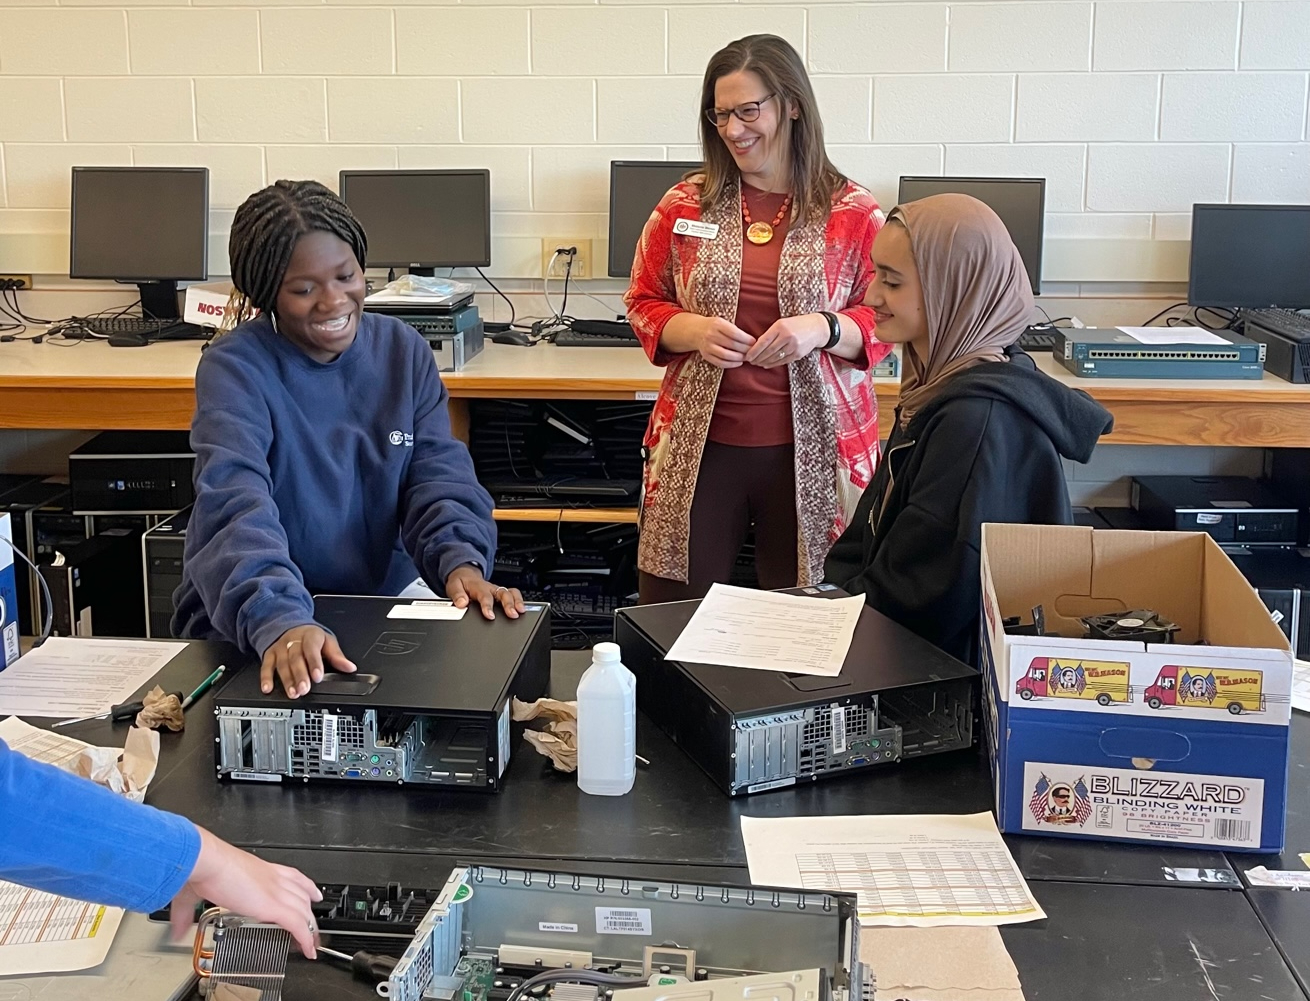 Melanie Merin talking with two female students in a cyber tech class who are assembling a desktop computer